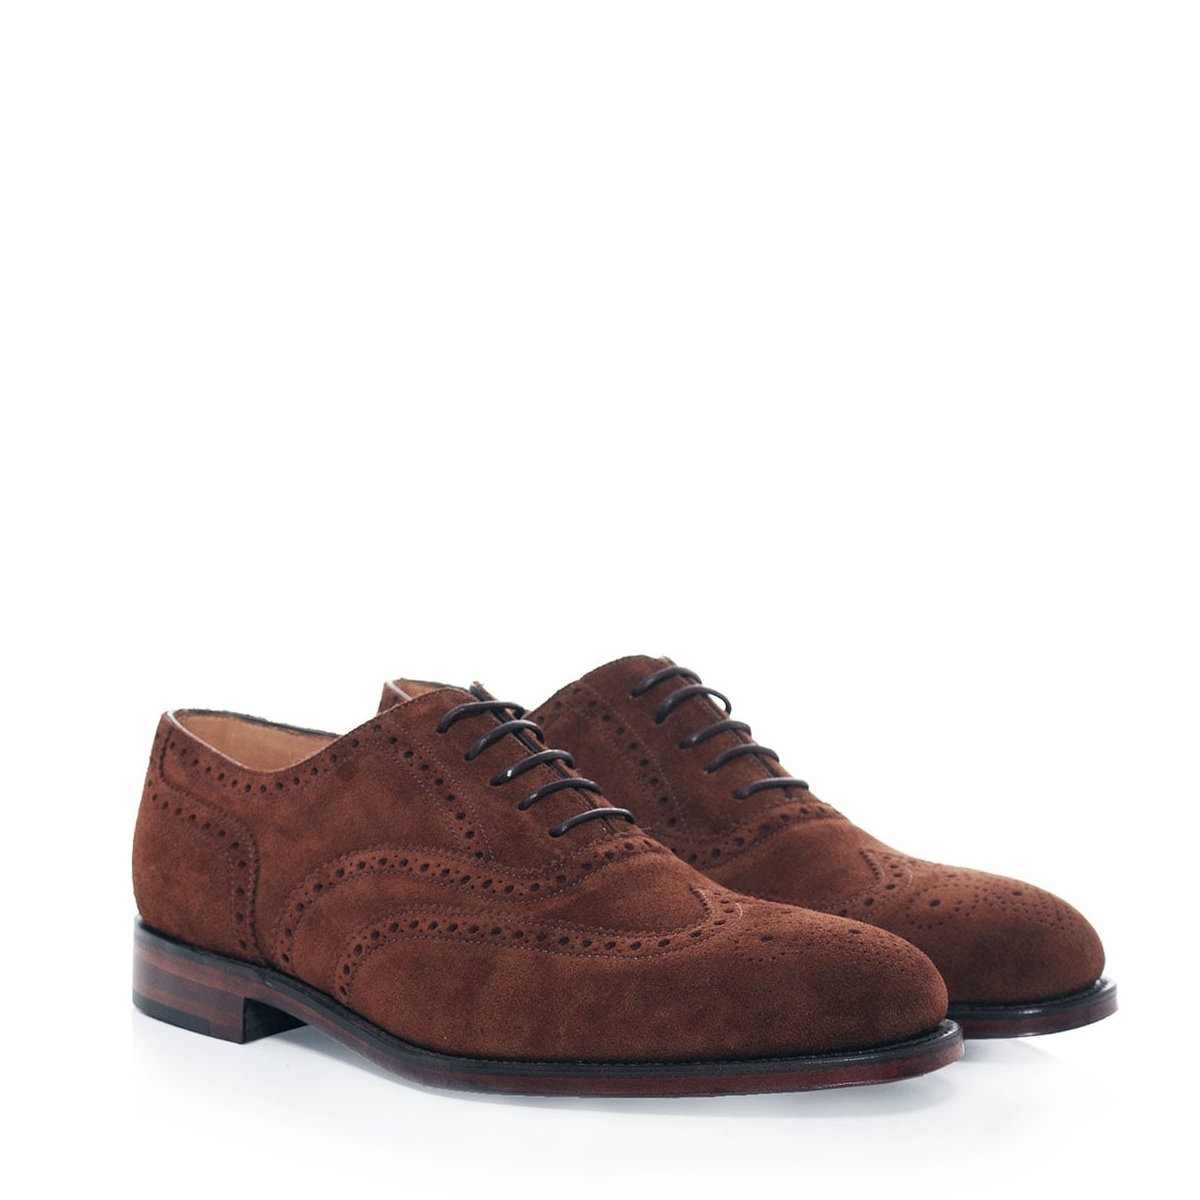 Loake Mens Buckingham Polo Brown Suede Brogue Lace-Up shoe - County ...